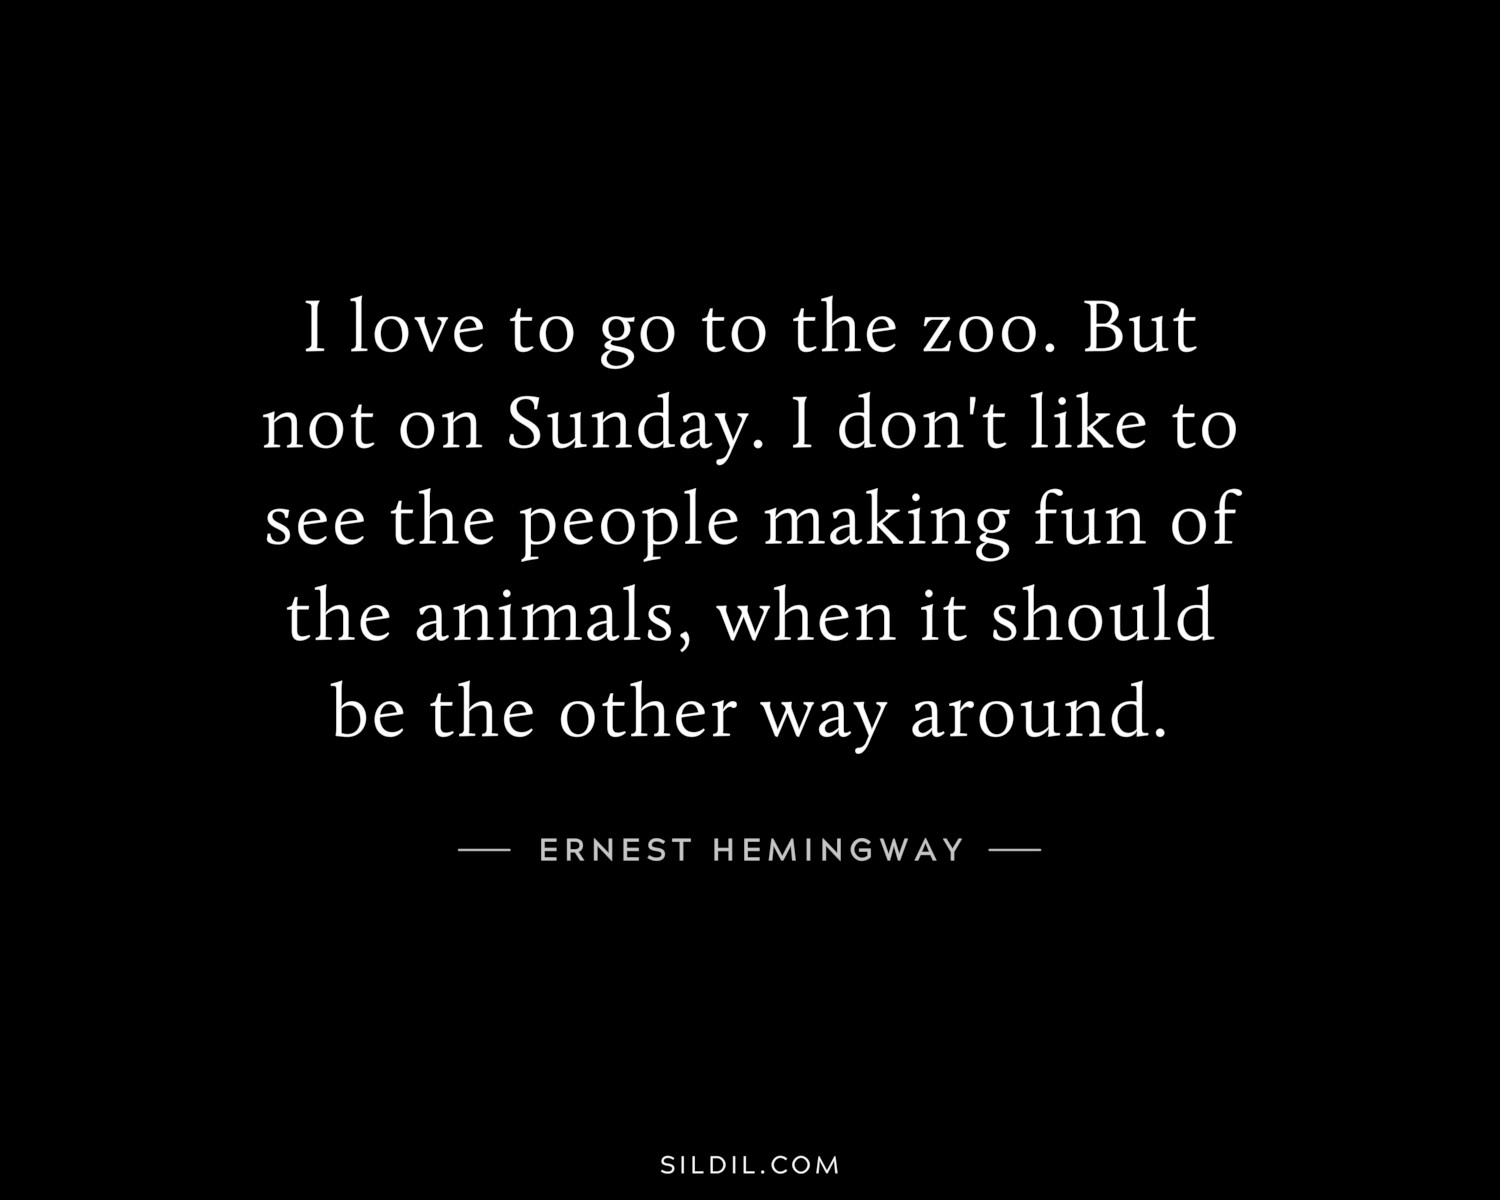 I love to go to the zoo. But not on Sunday. I don't like to see the people making fun of the animals, when it should be the other way around.